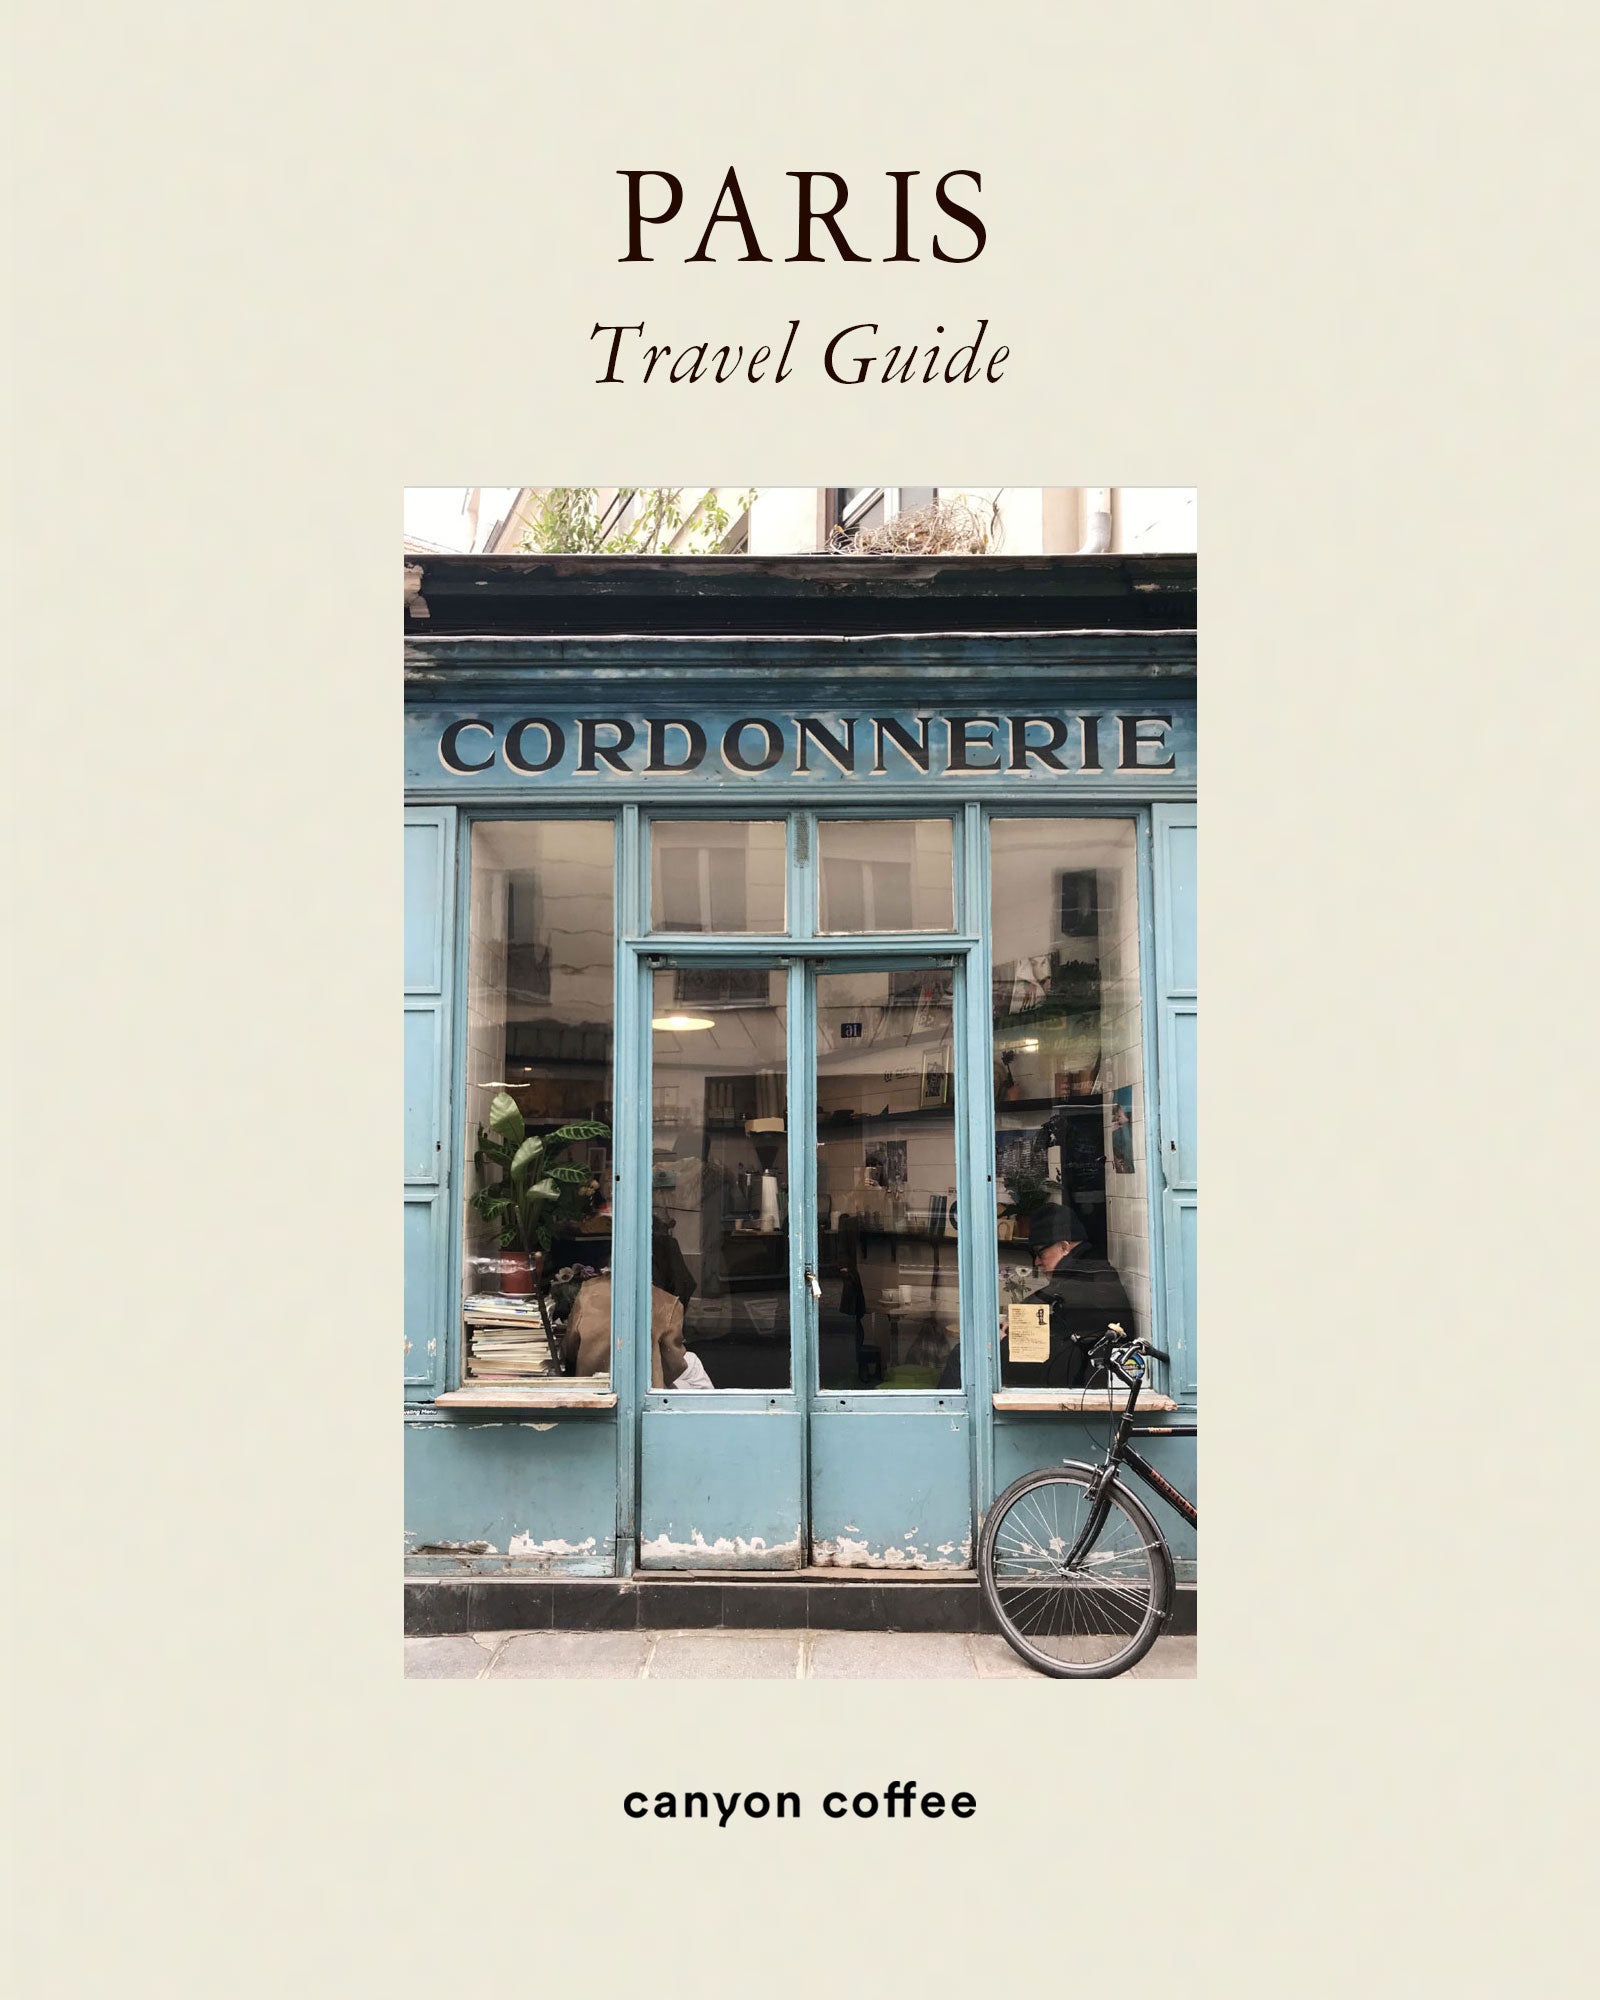 Coffee in Paris - a guide by Canyon Coffee